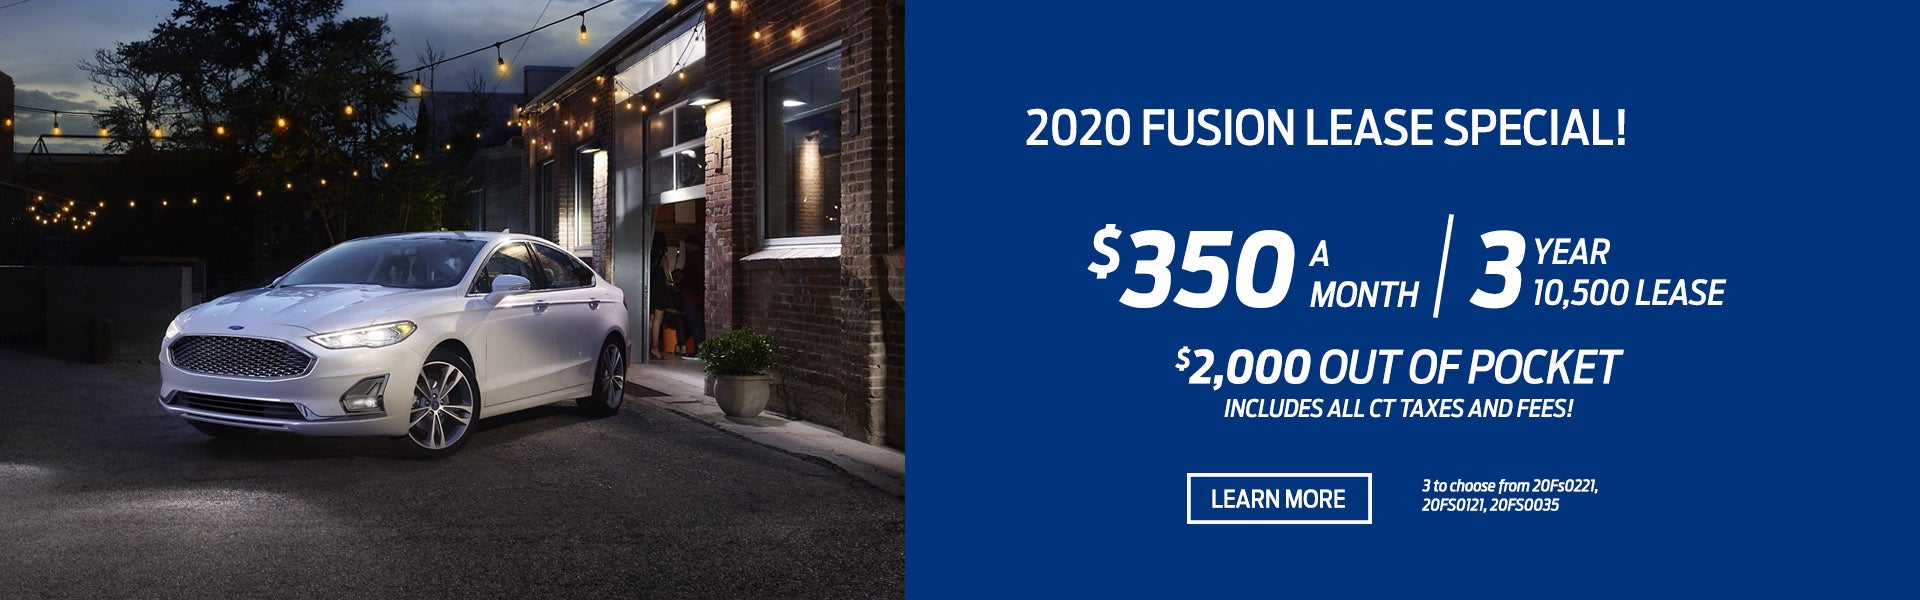 2020 Fusion Leasing Special